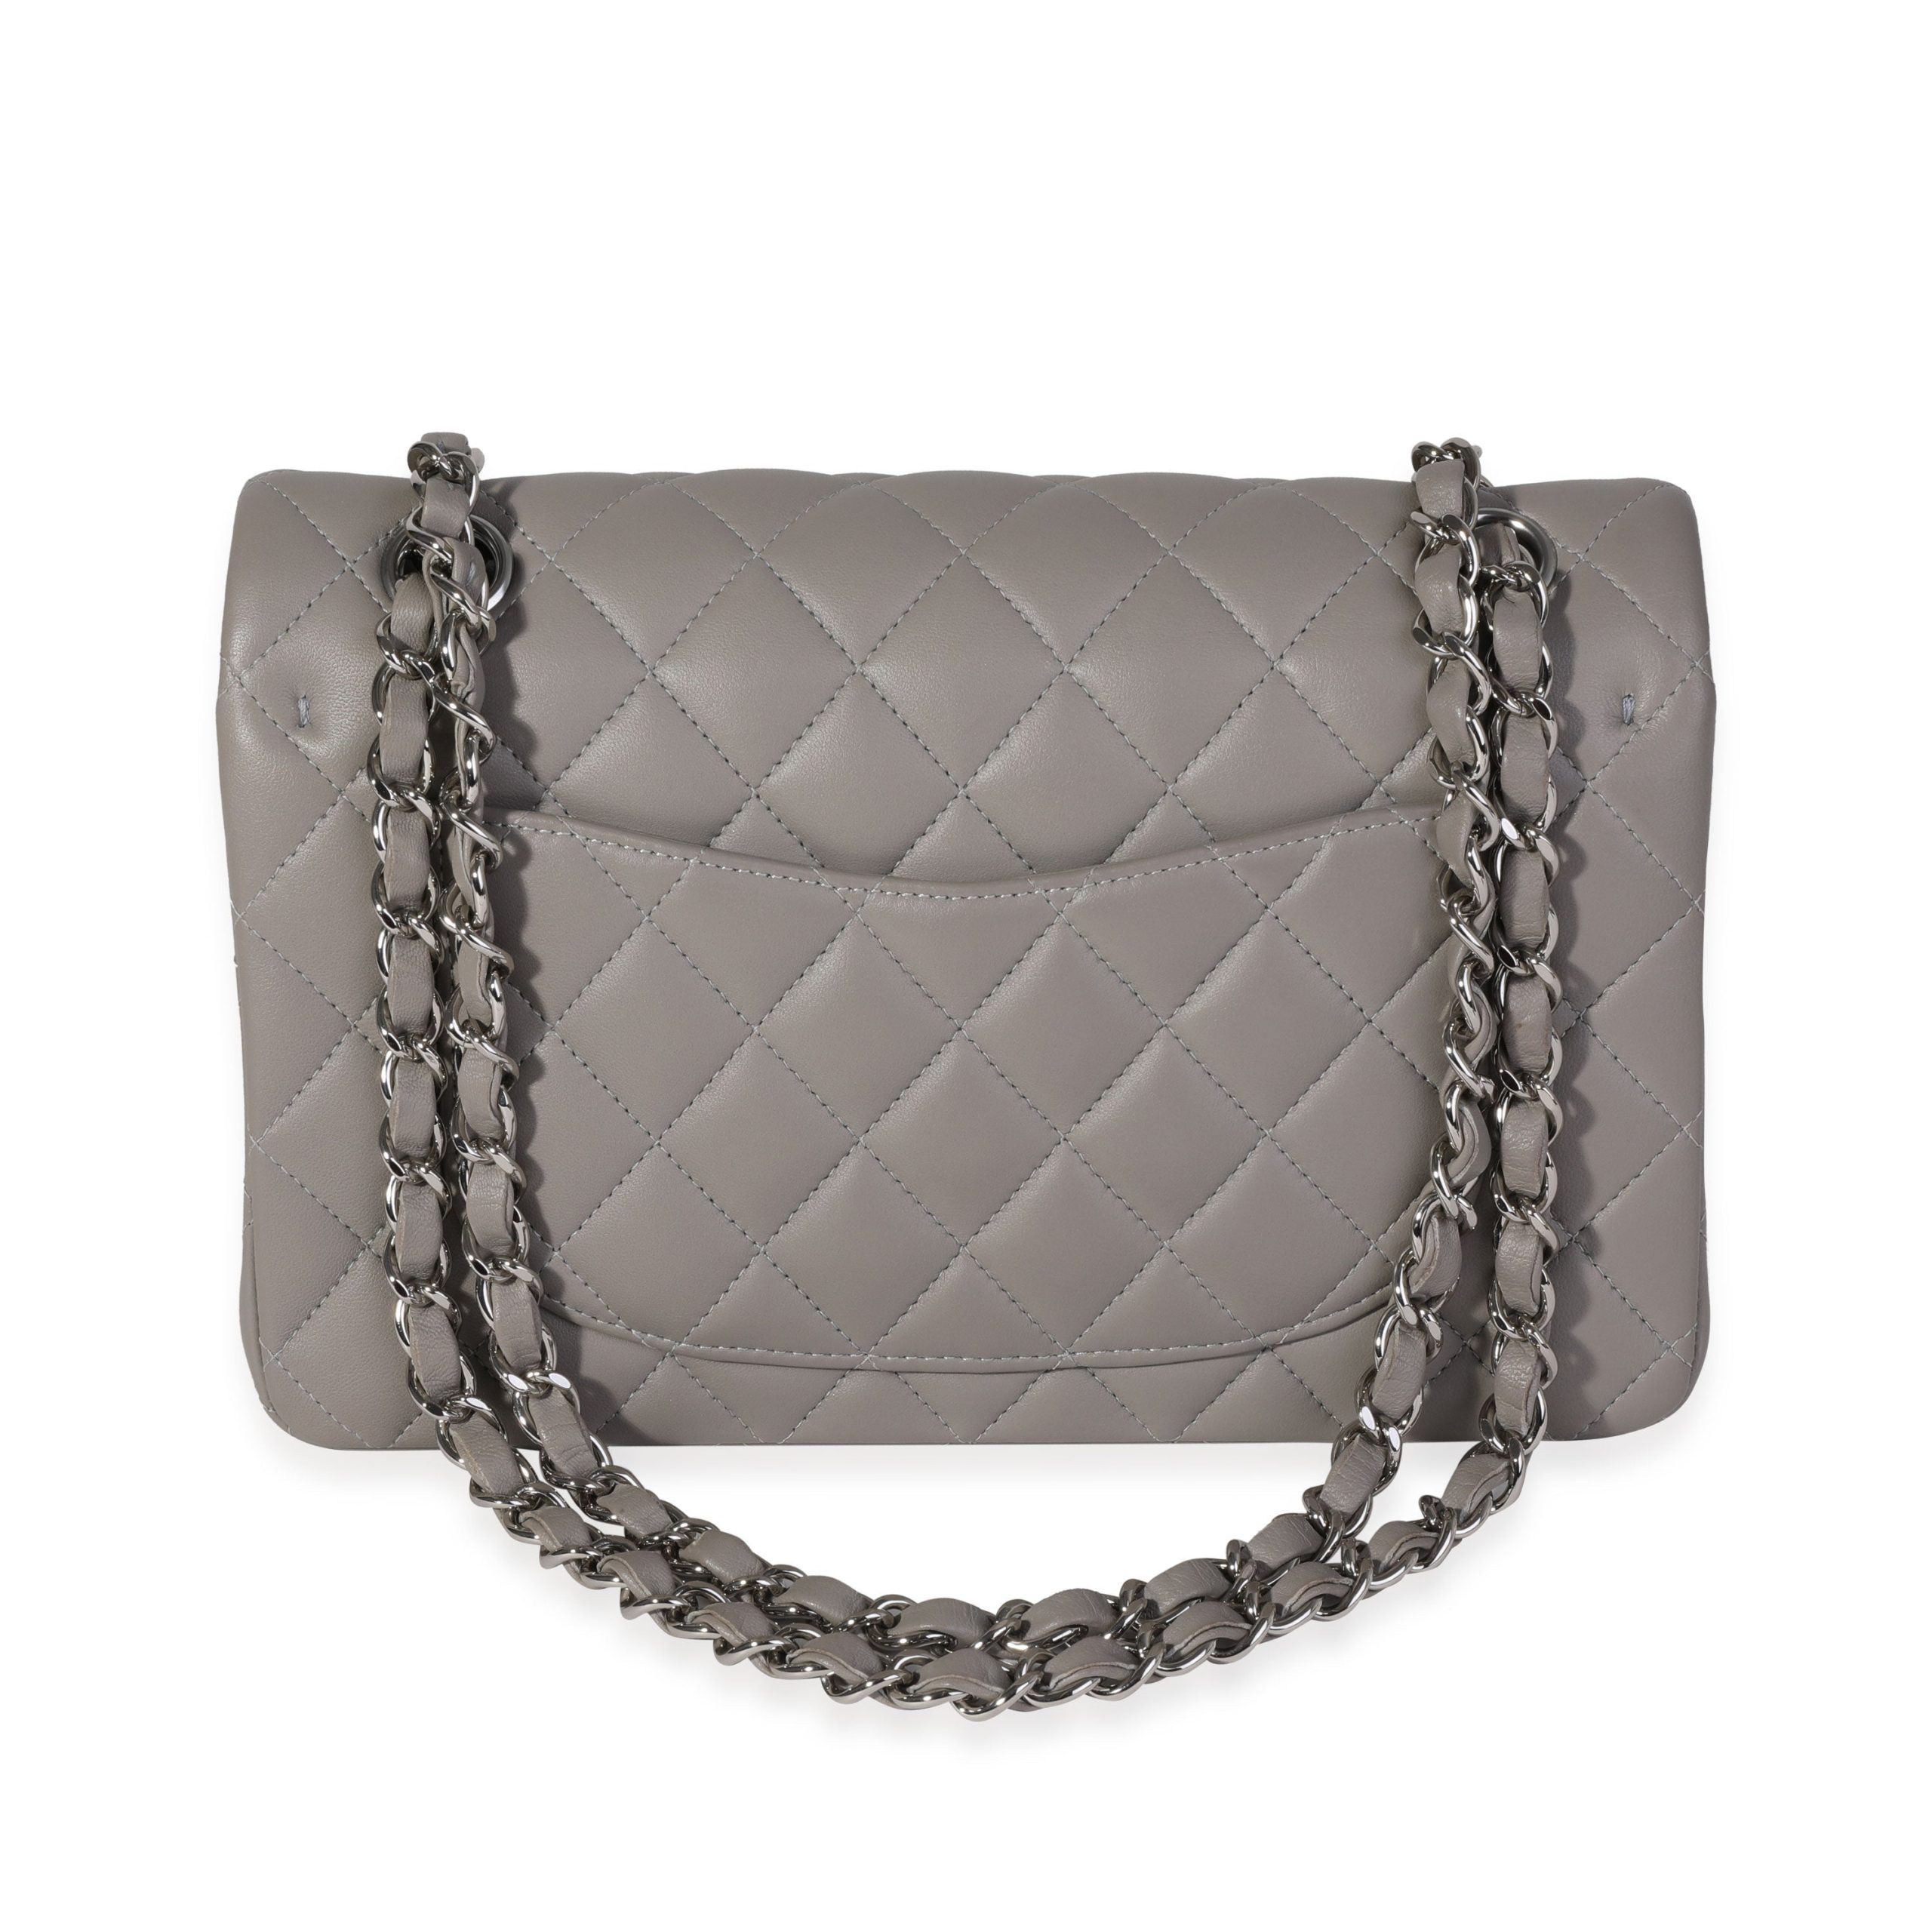 Chanel Chanel Grey Quilted Lambskin Small Classic Double Flap Bag Size ONE SIZE - 3 Thumbnail